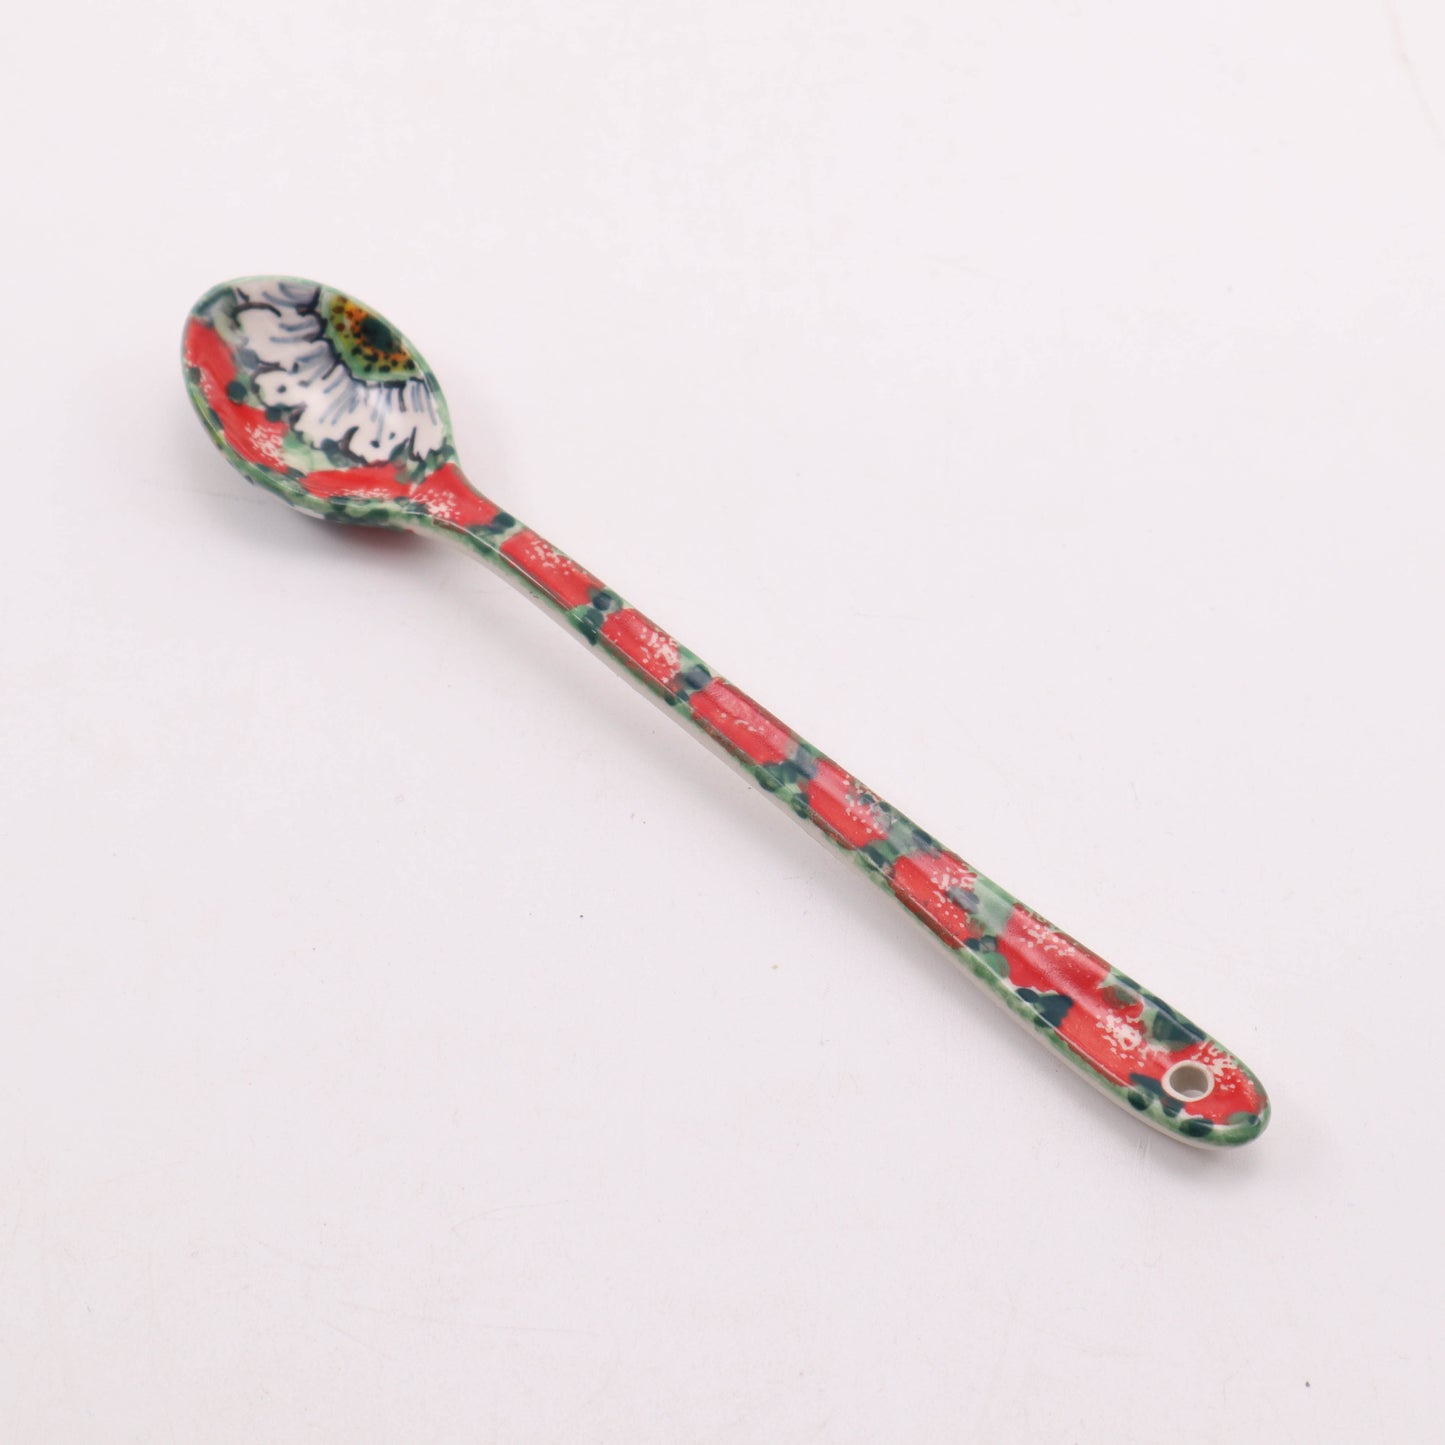 7" Latte Spoon. Pattern: White and Red